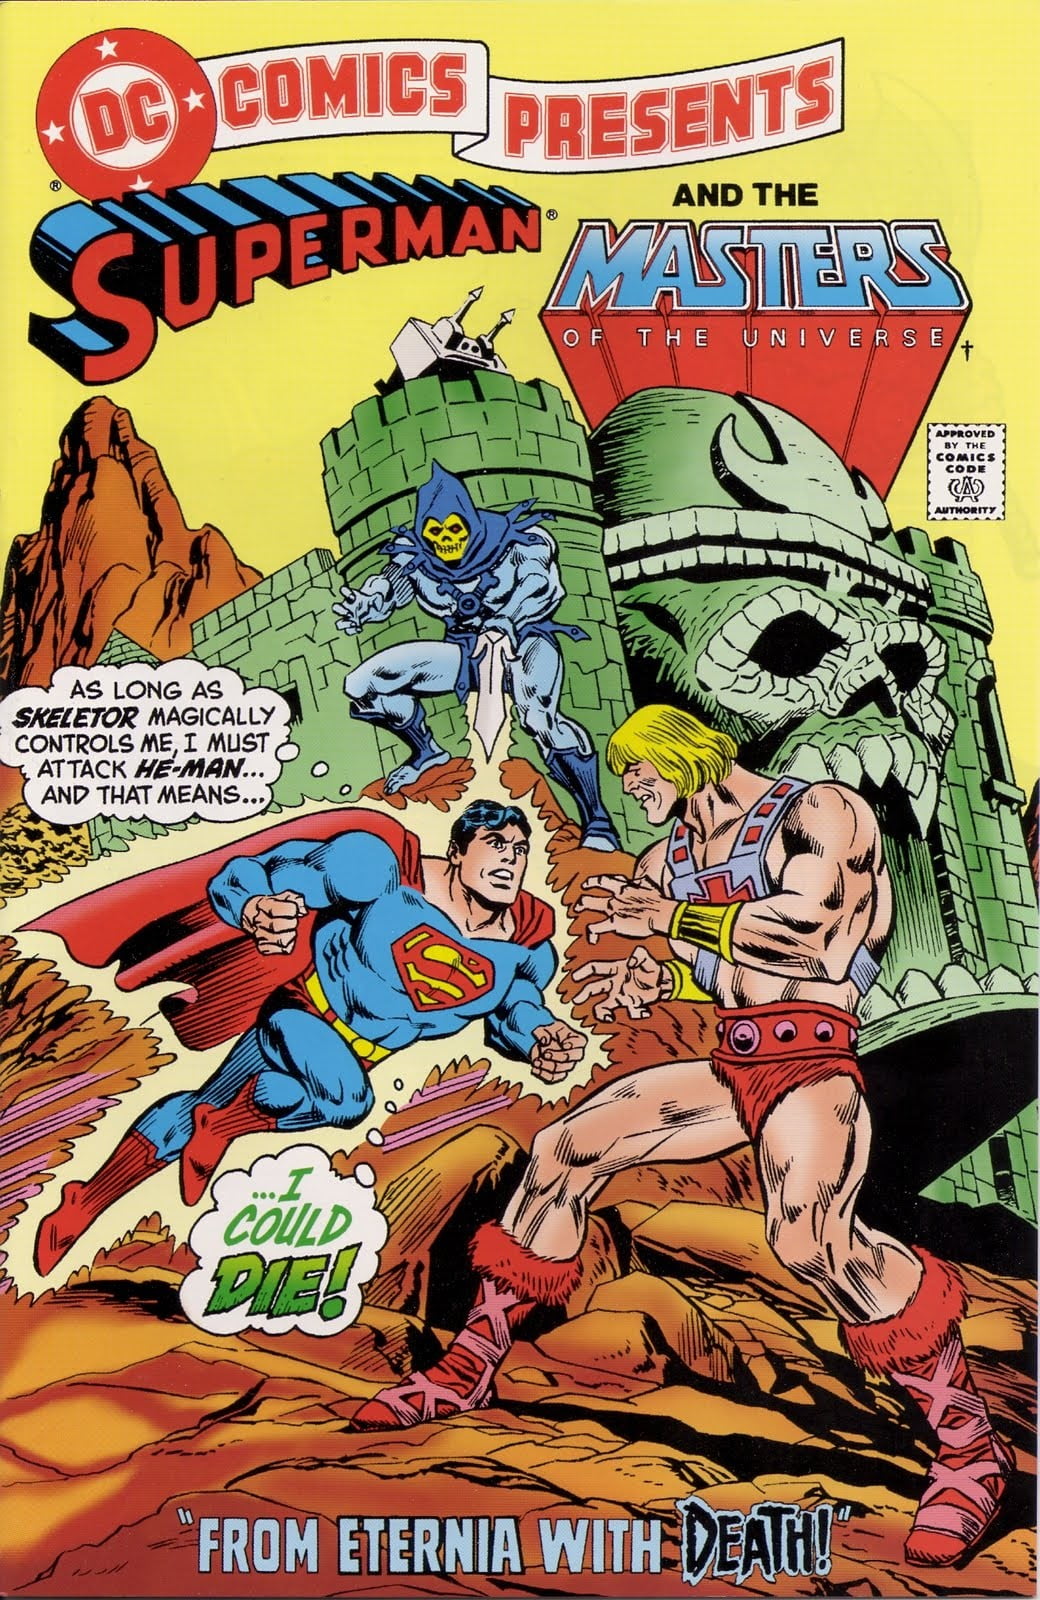 DC Comics Superman comic book, He-Man, He-Man and the Masters of the Universe, Skeletor, Superman